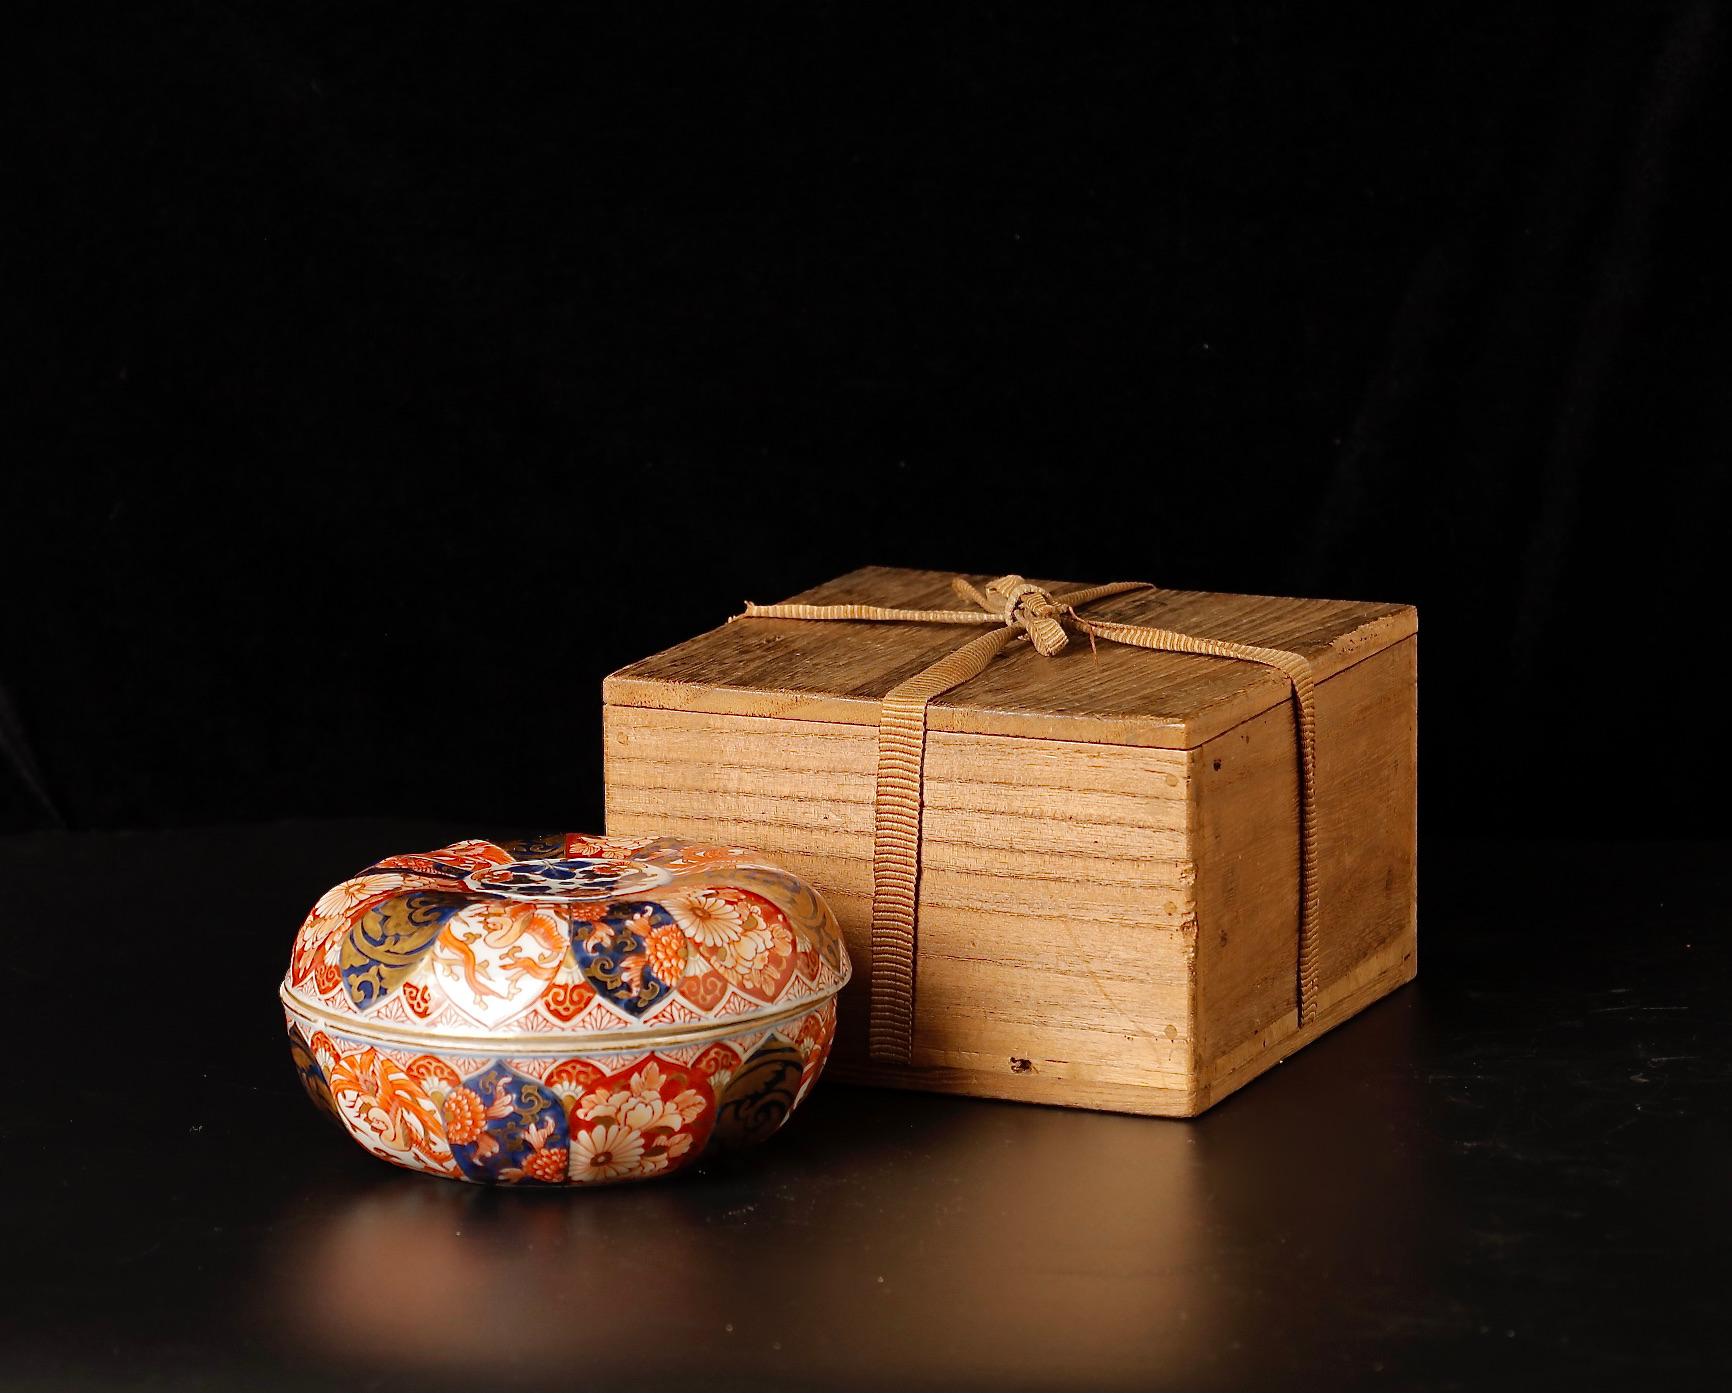 This 19th-century Imari ware box (SKU: ZD49) is a resplendent example of the cherished Japanese porcelain art form, renowned for its rich palette and intricate designs. Hand-painted with meticulous care, the box displays a kaleidoscope of